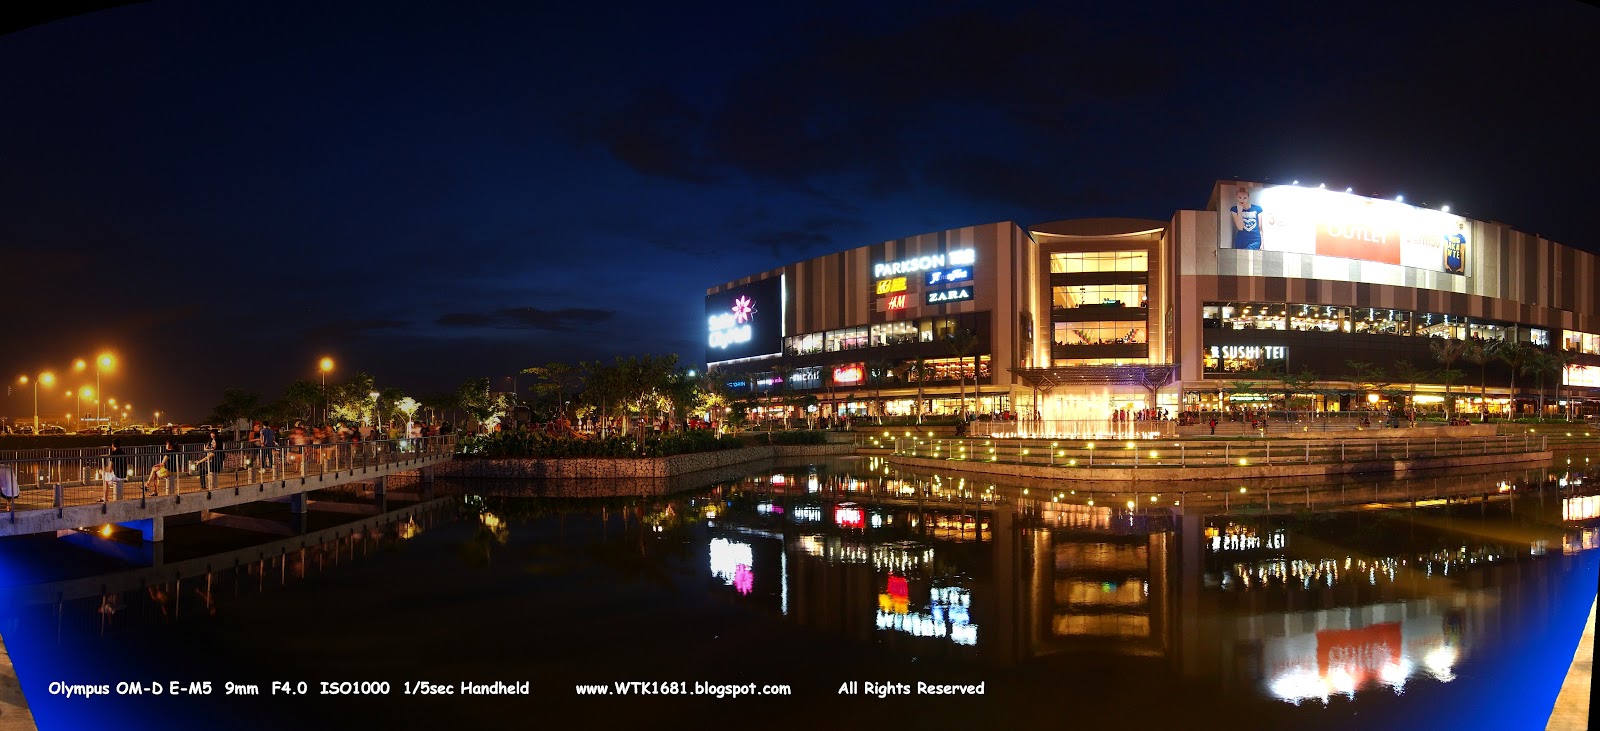 Imaging Stories: Setia City Mall